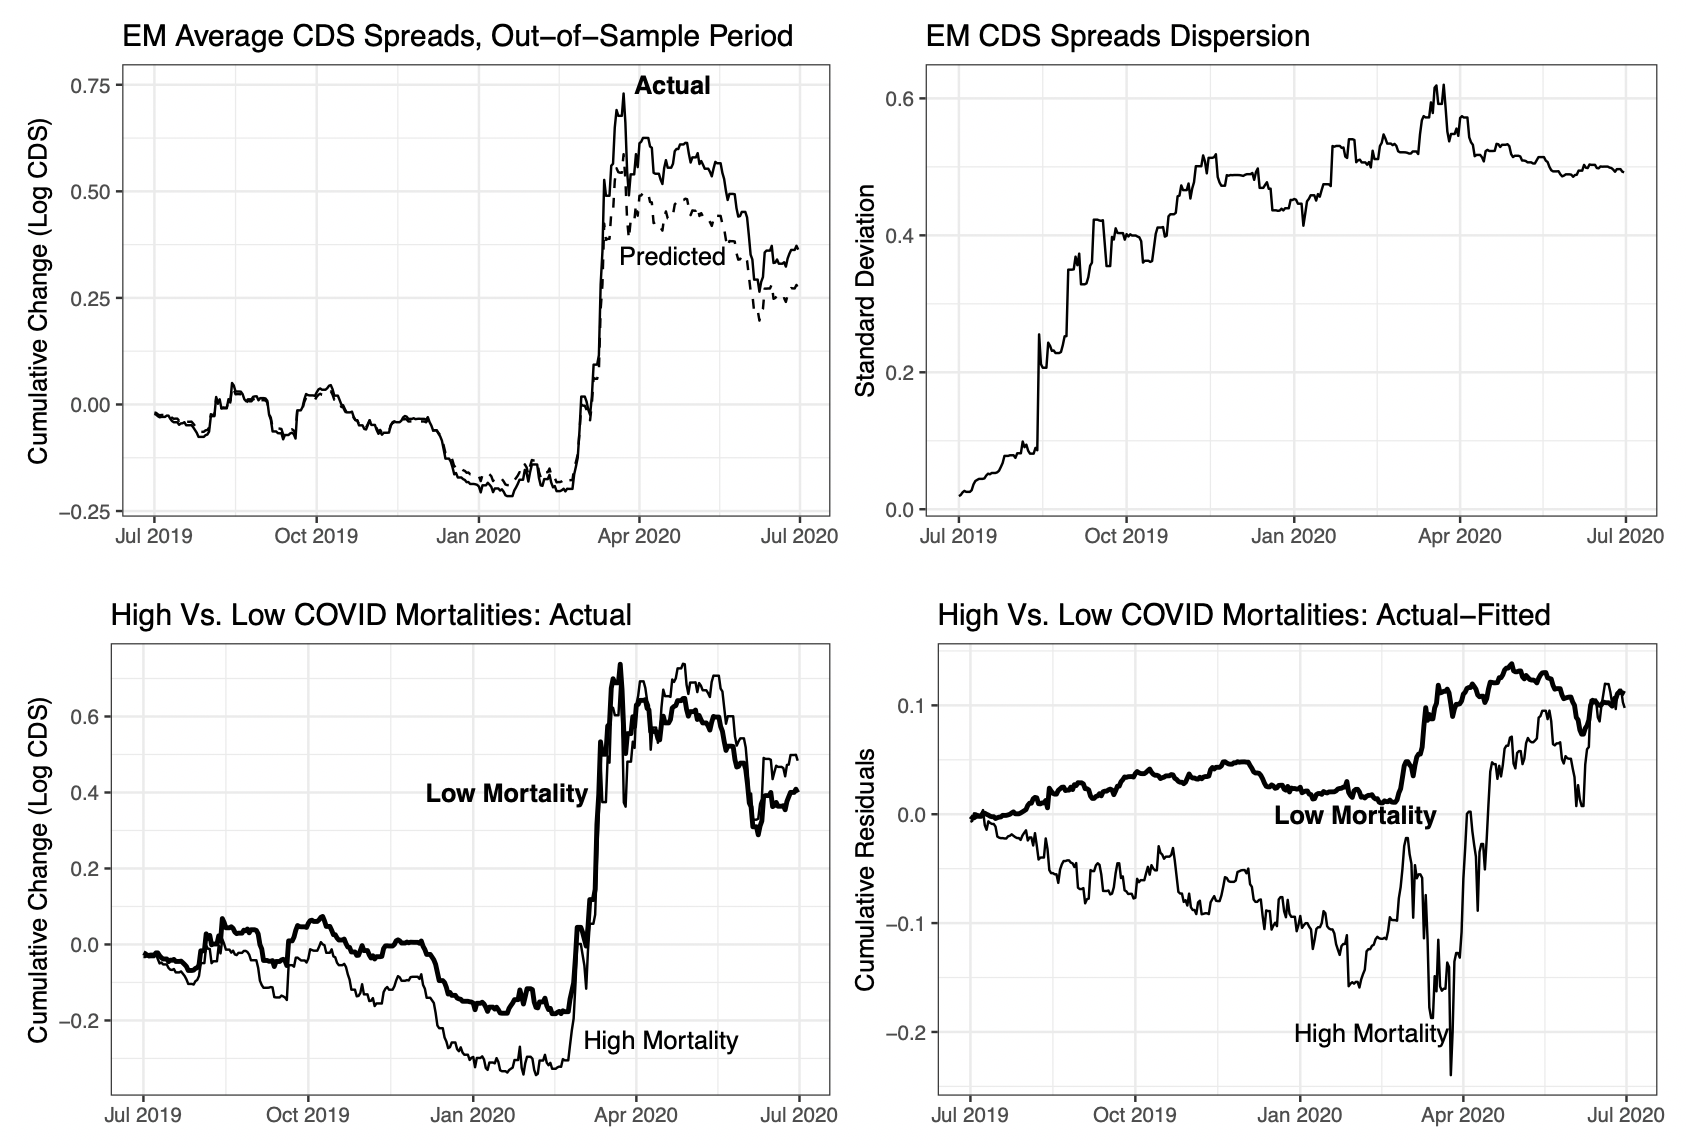 Emerging markets sovereign spreads and country-specific fundamentals during COVID-19 4